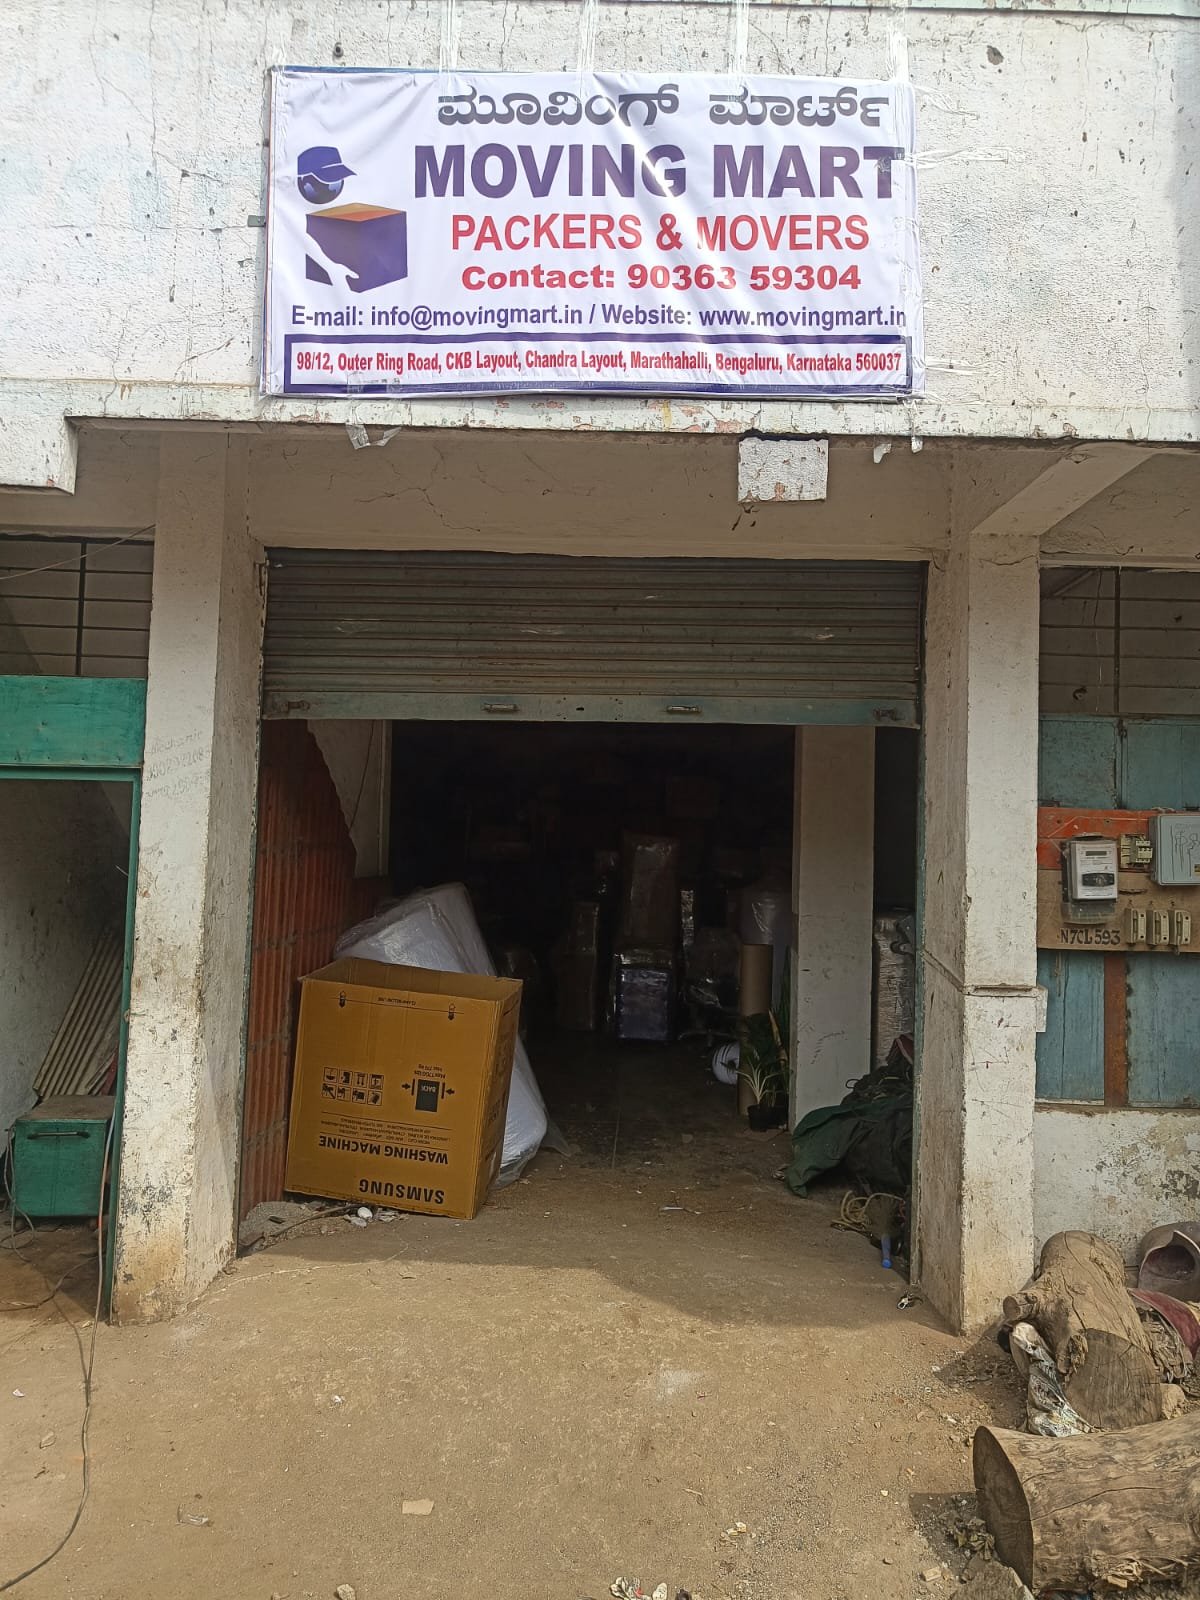 Moving Mart Packers and Movers  cover